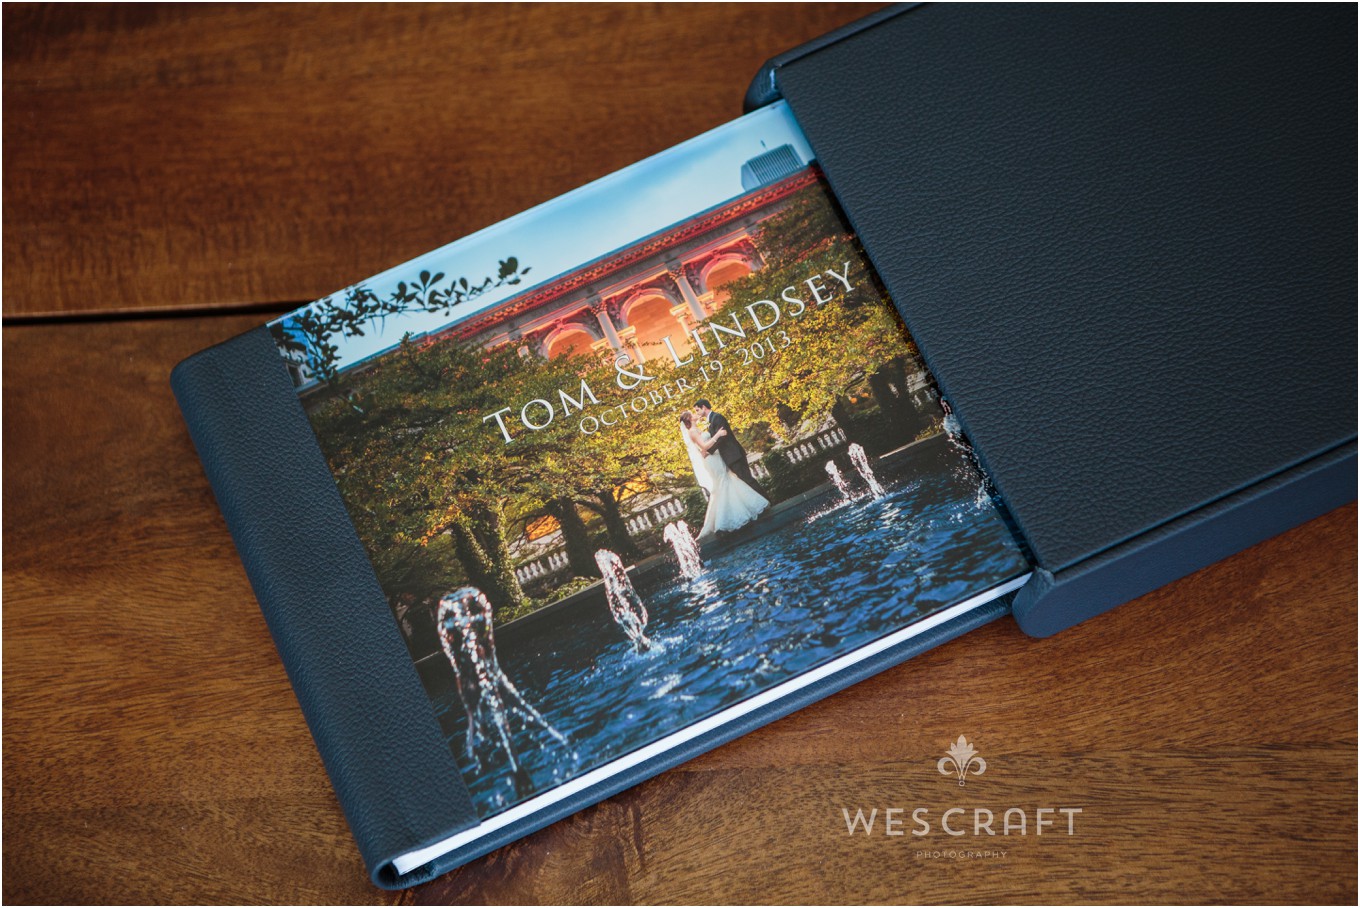 We helped Lindsey & Tom to choose a deep blue leather to anchor the colors in the primary cover photo.  The Acrylic plate seals a metallic print beneath it for a bold and colorful album cover.